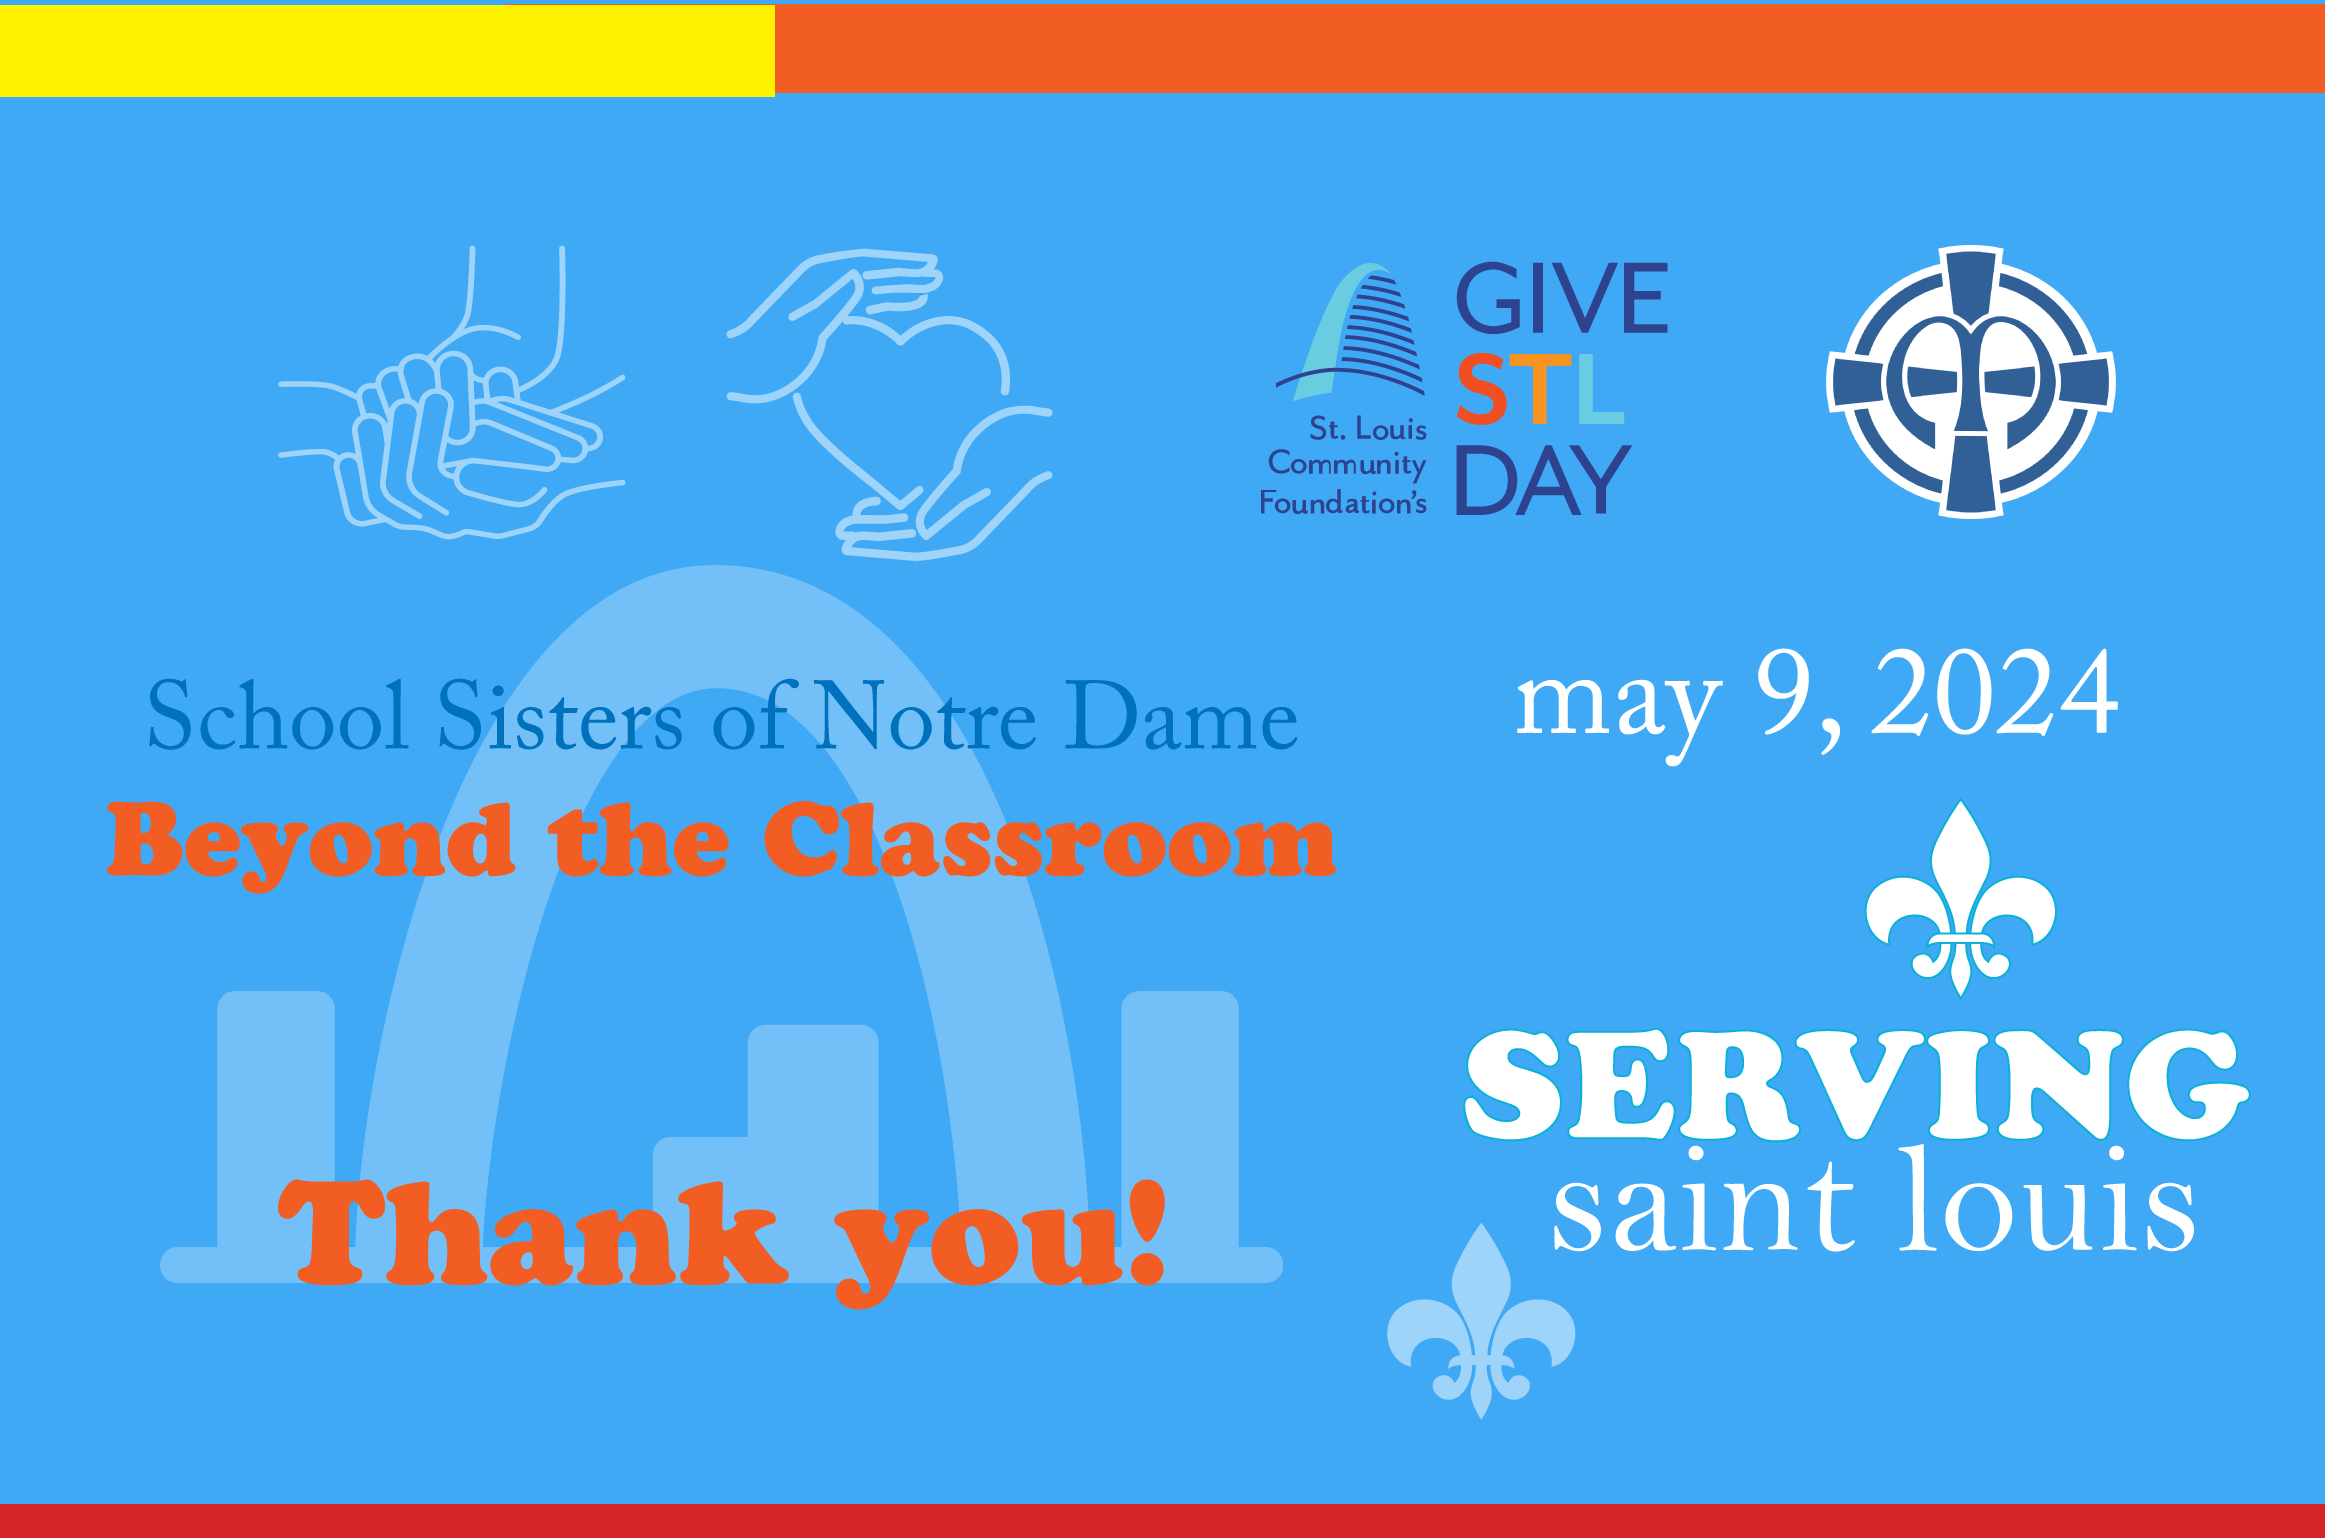 Give St. Louis day event thank you image.